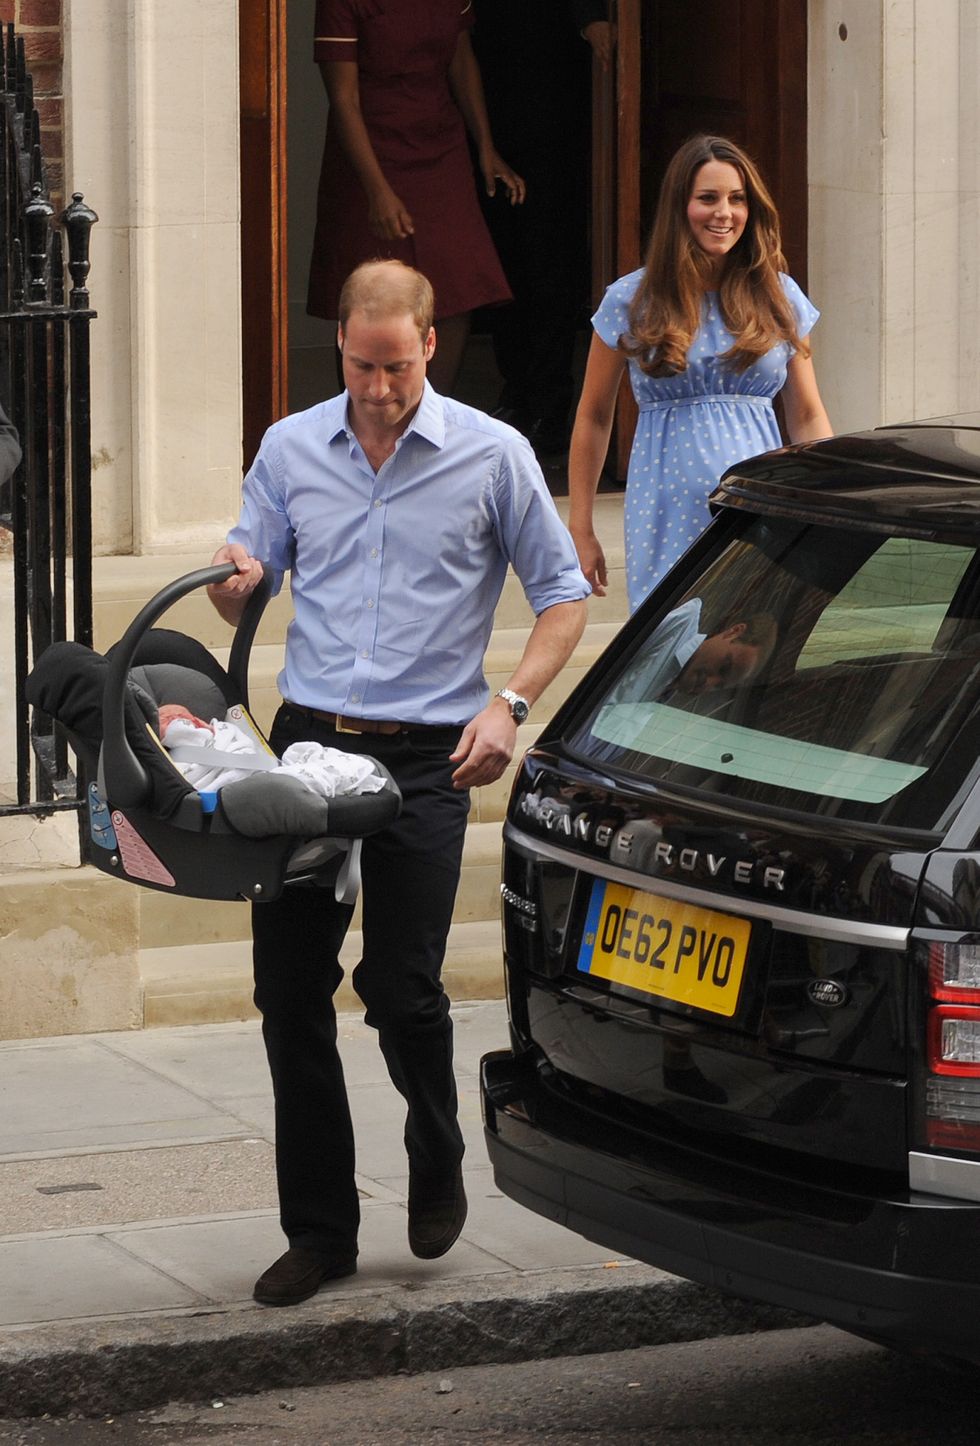 Prince William with Prince George